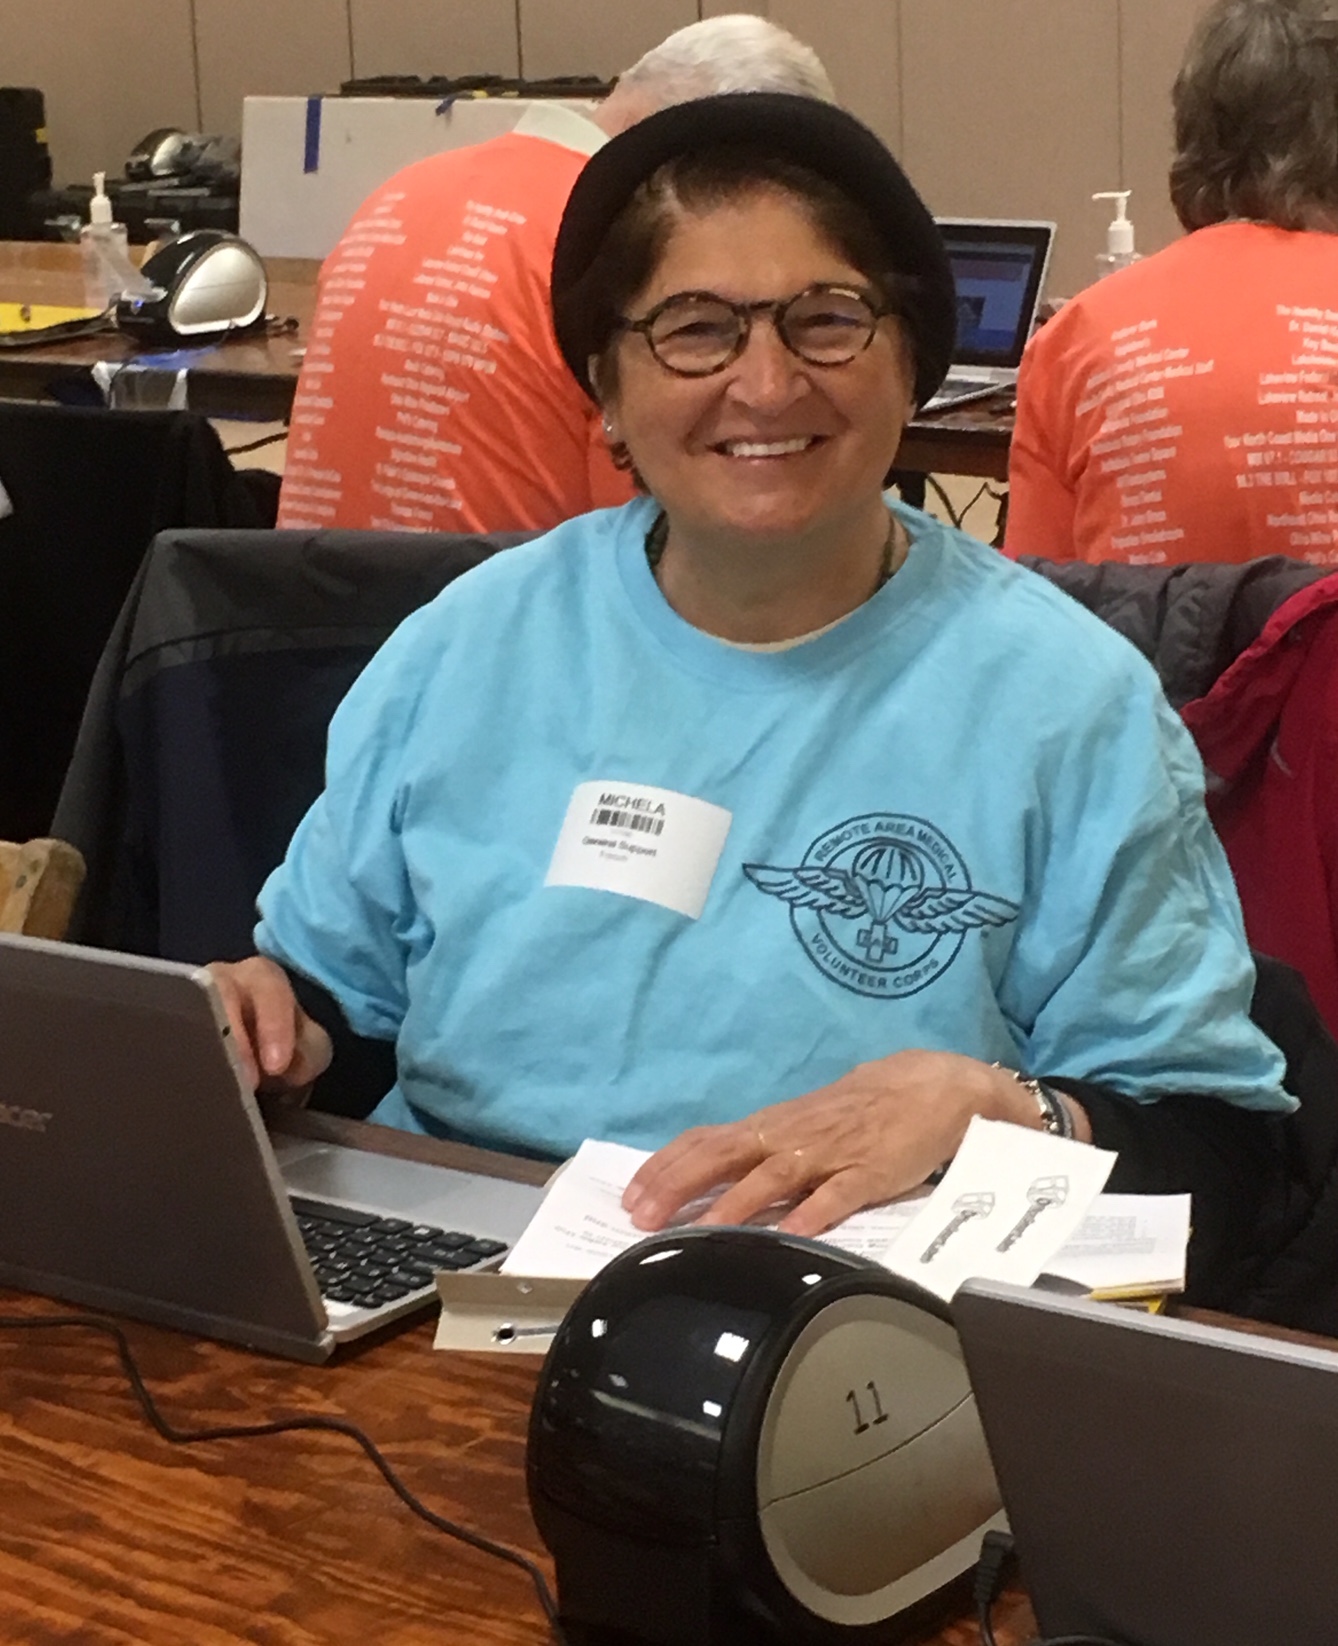 Michela as a social worker, on the job at Remote Area Medical, Ashtabula, OH, April 2018. She shares, “I am at my desk ready to meet patients at 5:30 AM. My day starts at 6:00AM and ends when the last person has been seen. We go to the poorest parts of the United States.” Photo courtesy of Michela Griffo.